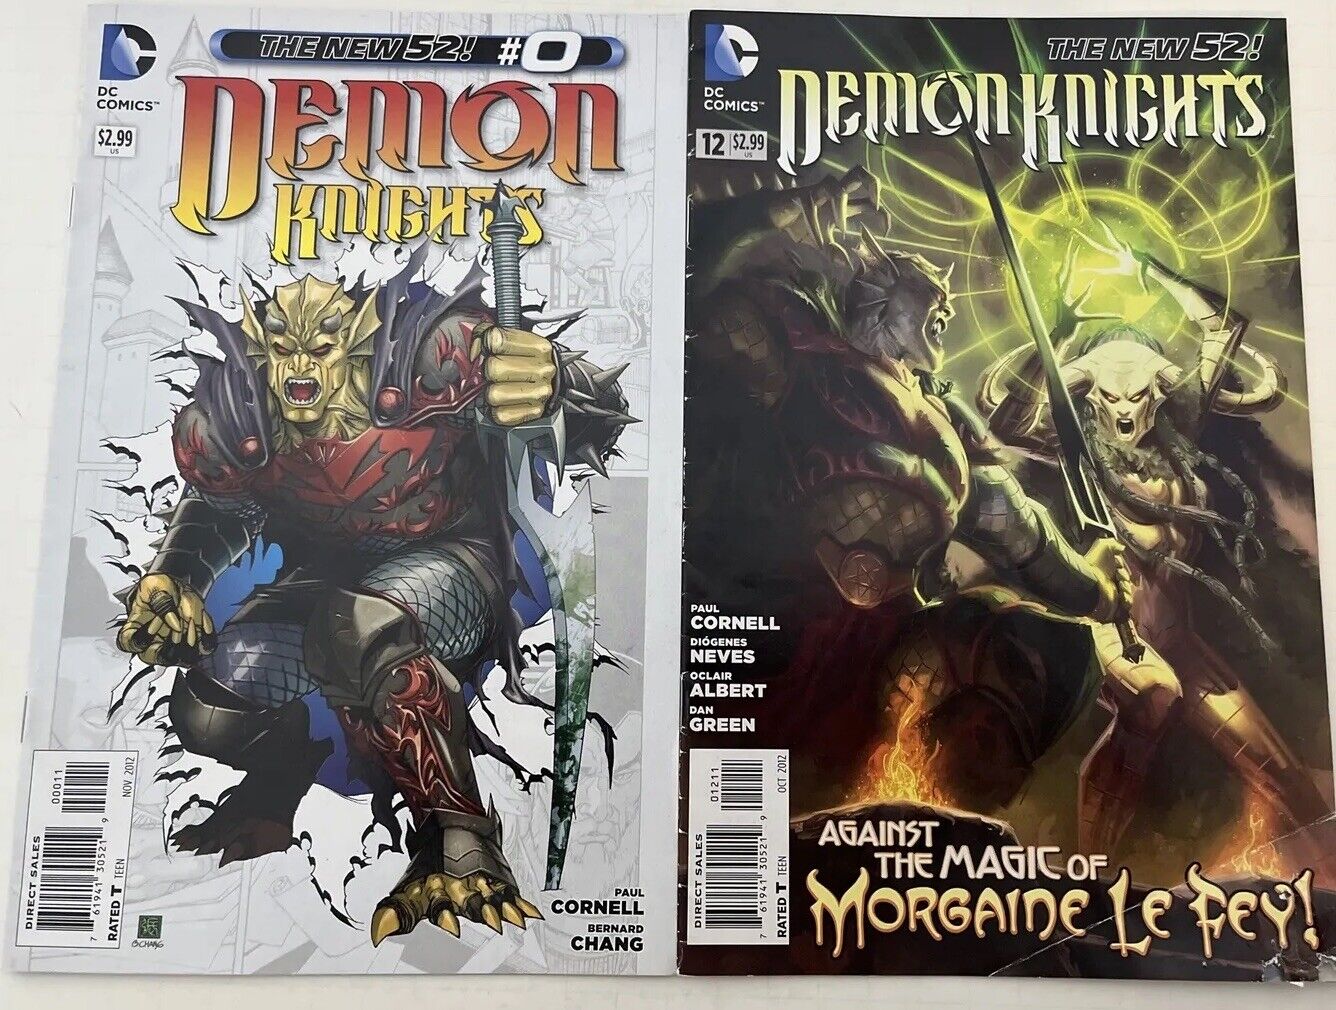 Demon Knights #0, (2012, DC): The New 52 Also Against The Magic Of Morgaine Fey